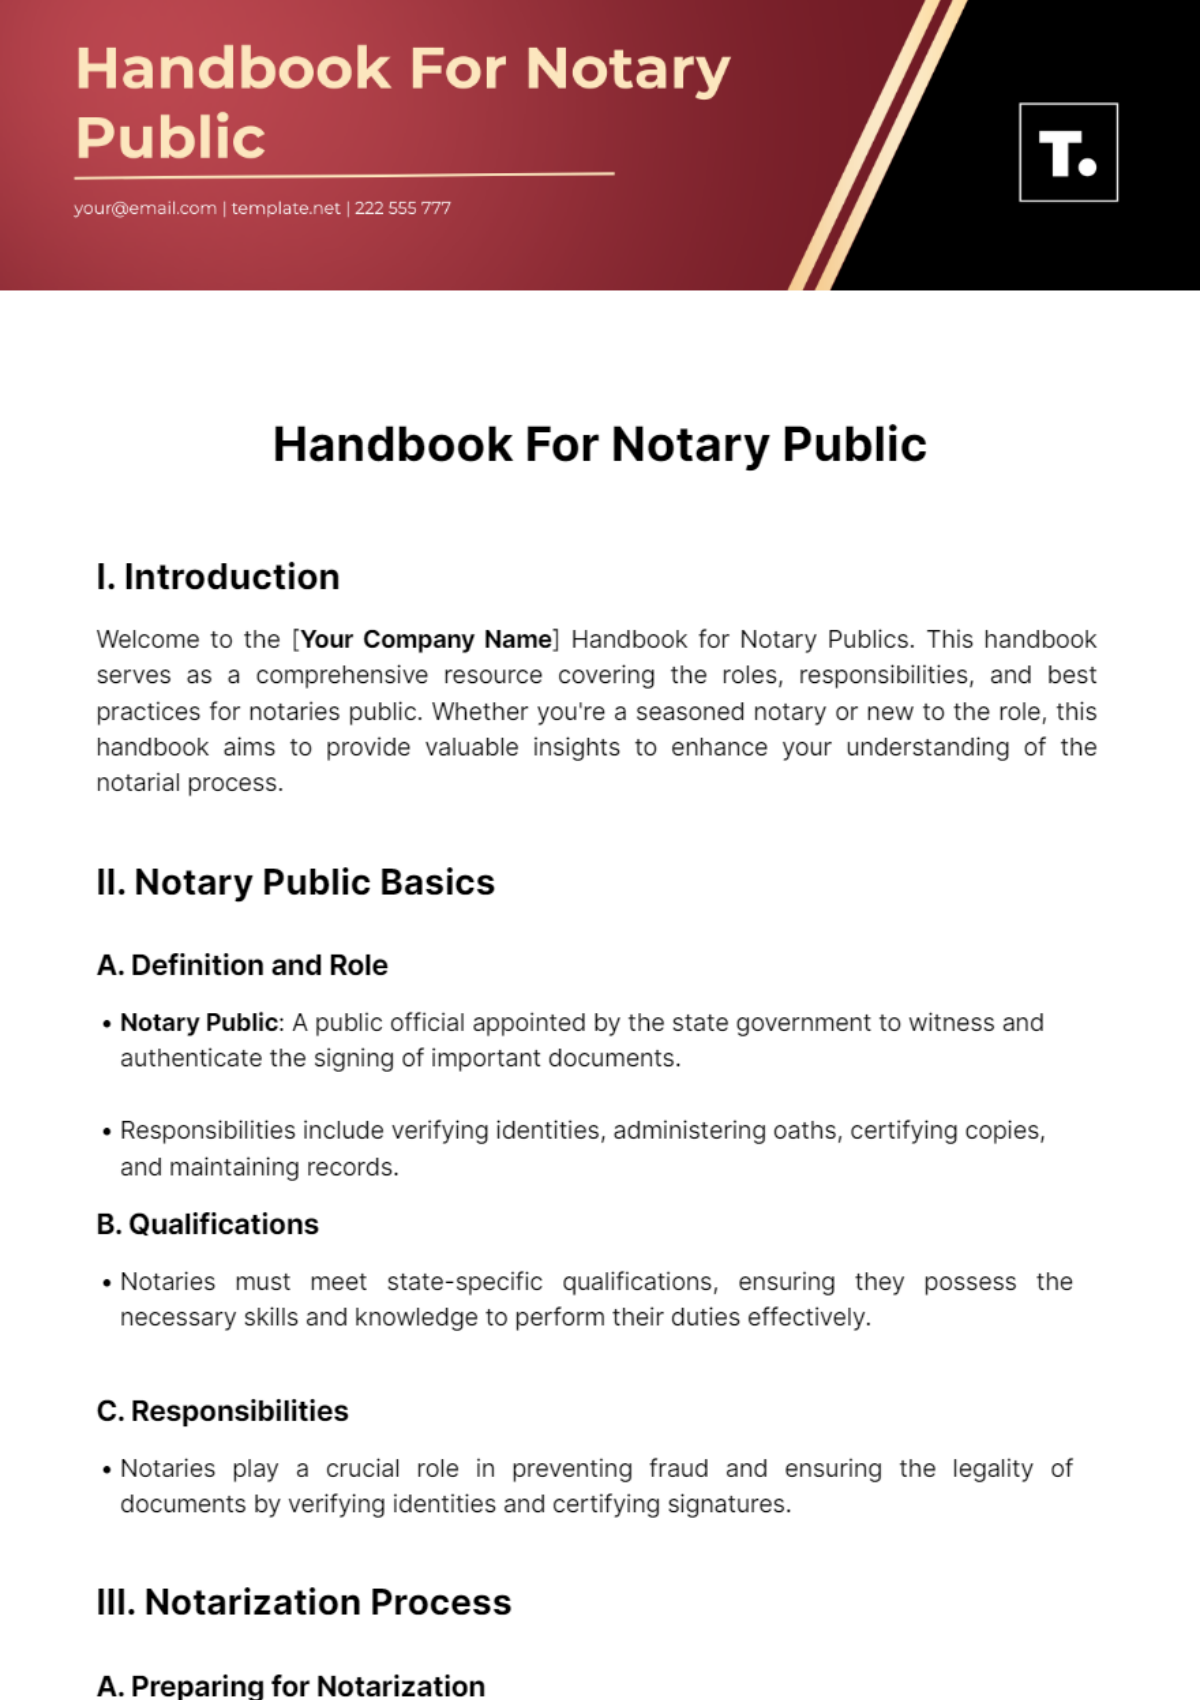 Free Handbook For Notary Public Template